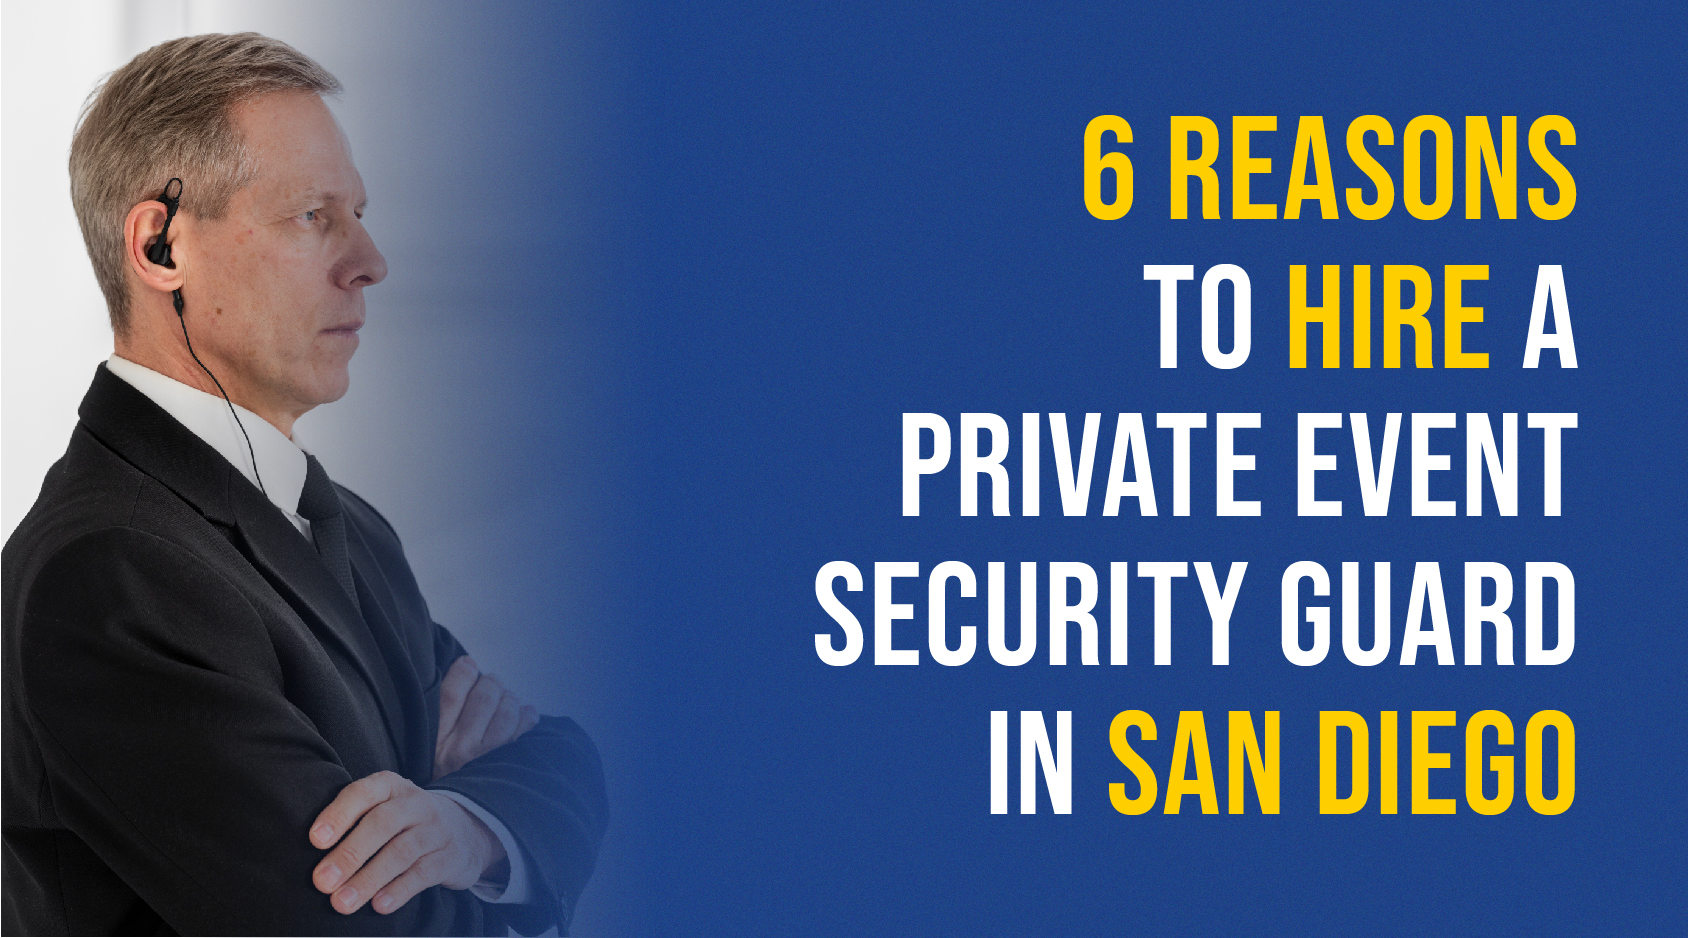 6 reason to hire a private event security guard in san diedo